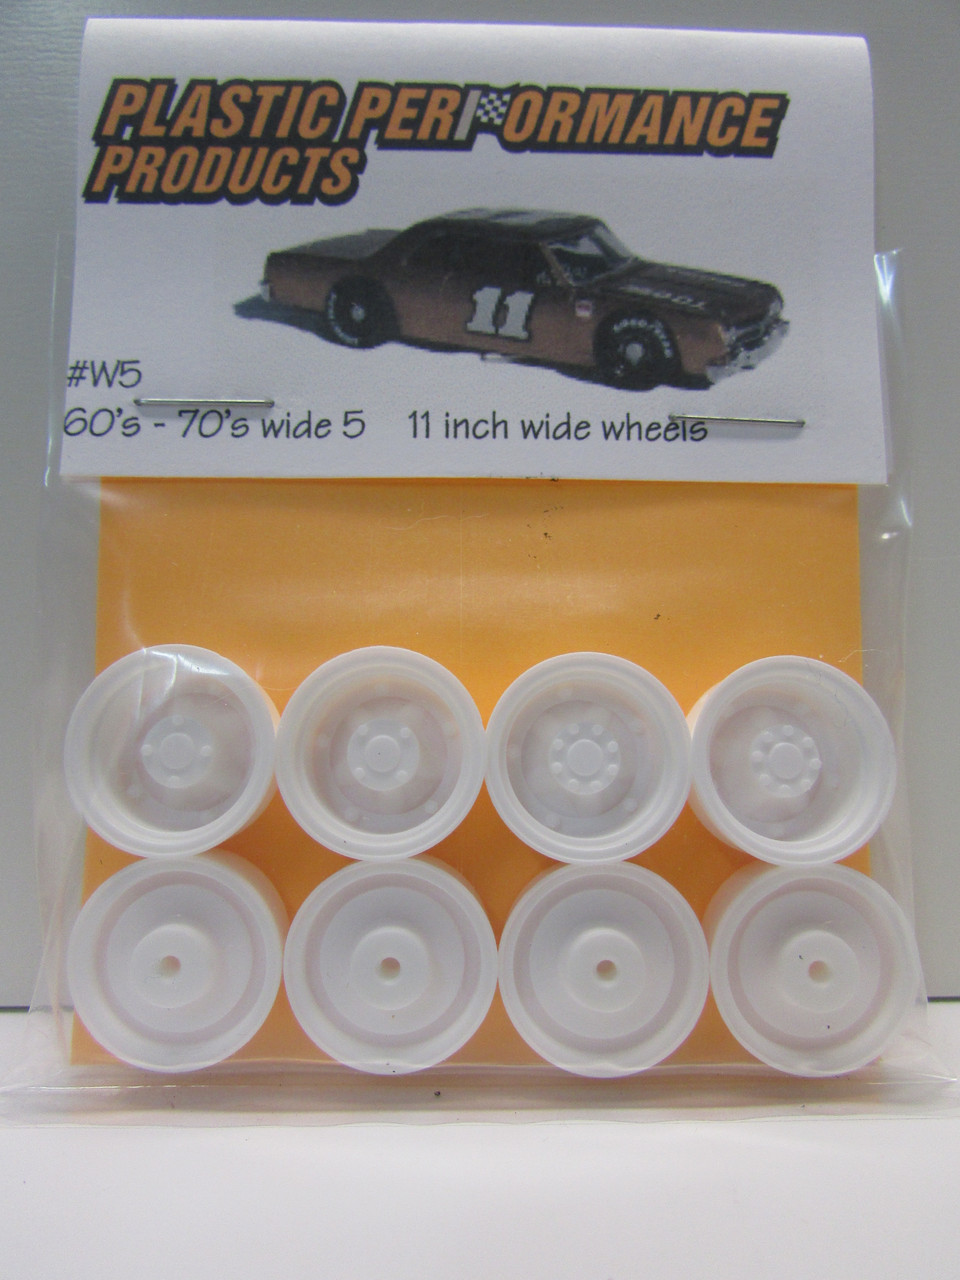 Plastic Performance Products W5 Wide 5 11" 1960's-70's Wheel Set